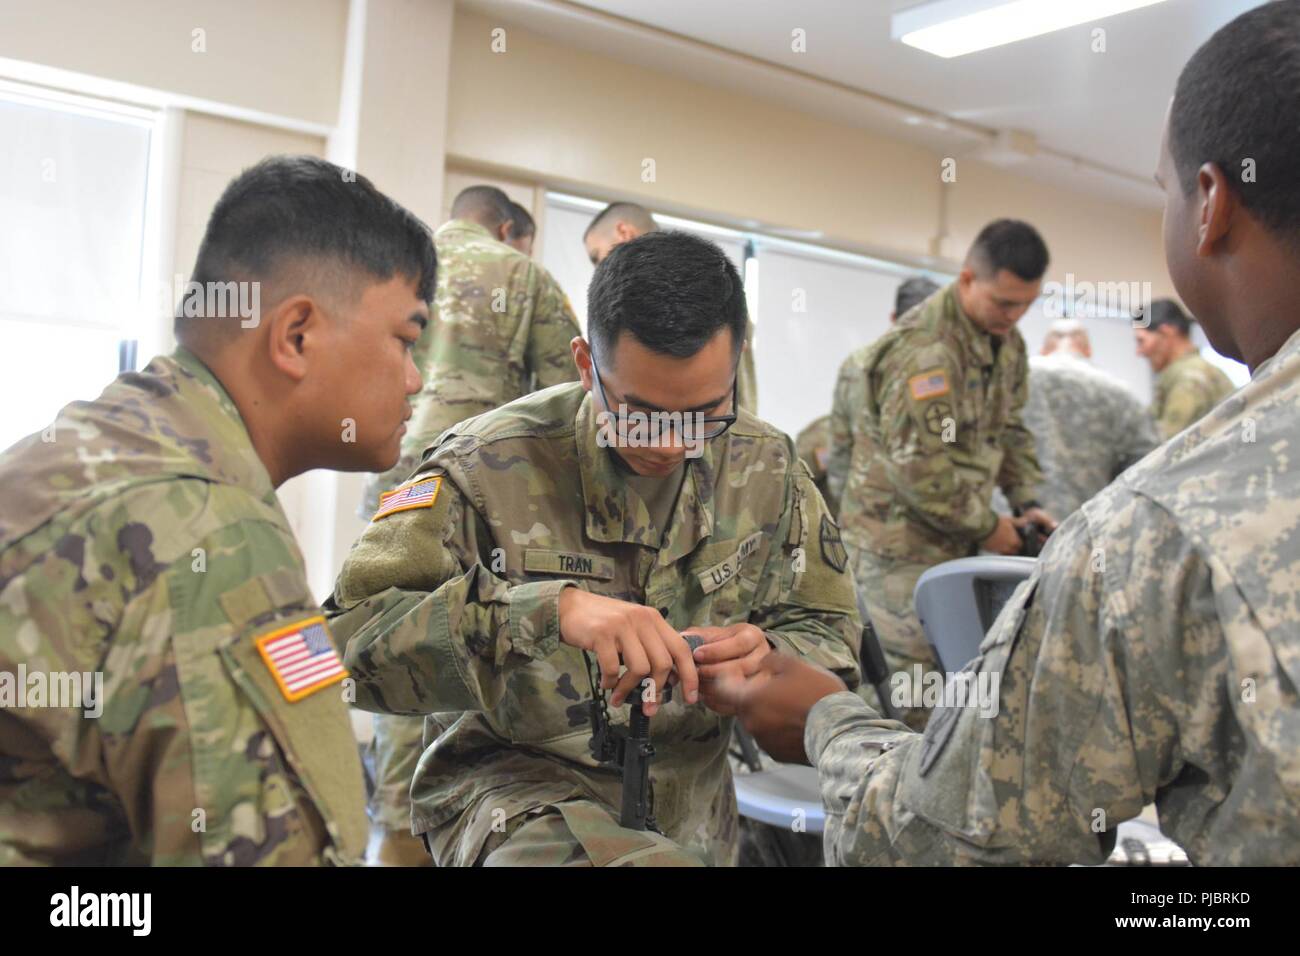 U.S. Army Reserve Troop List Unit Soldiers disassemble an M240B machine gun during Operation Cold Steel II, July 9, 2018 at Joint Base McGuire-Dix-Lakehurst, N.J. Operation Cold Steel is the U.S. Army Reserve’s crew-served weapons qualification and validation exercise to ensure America’s Army Reserve units and Soldiers are trained and ready to deploy on short notice as part of Ready Force X and bring combat-ready and lethal firepower in support of the Army and our joint partners anywhere in the world. Stock Photo